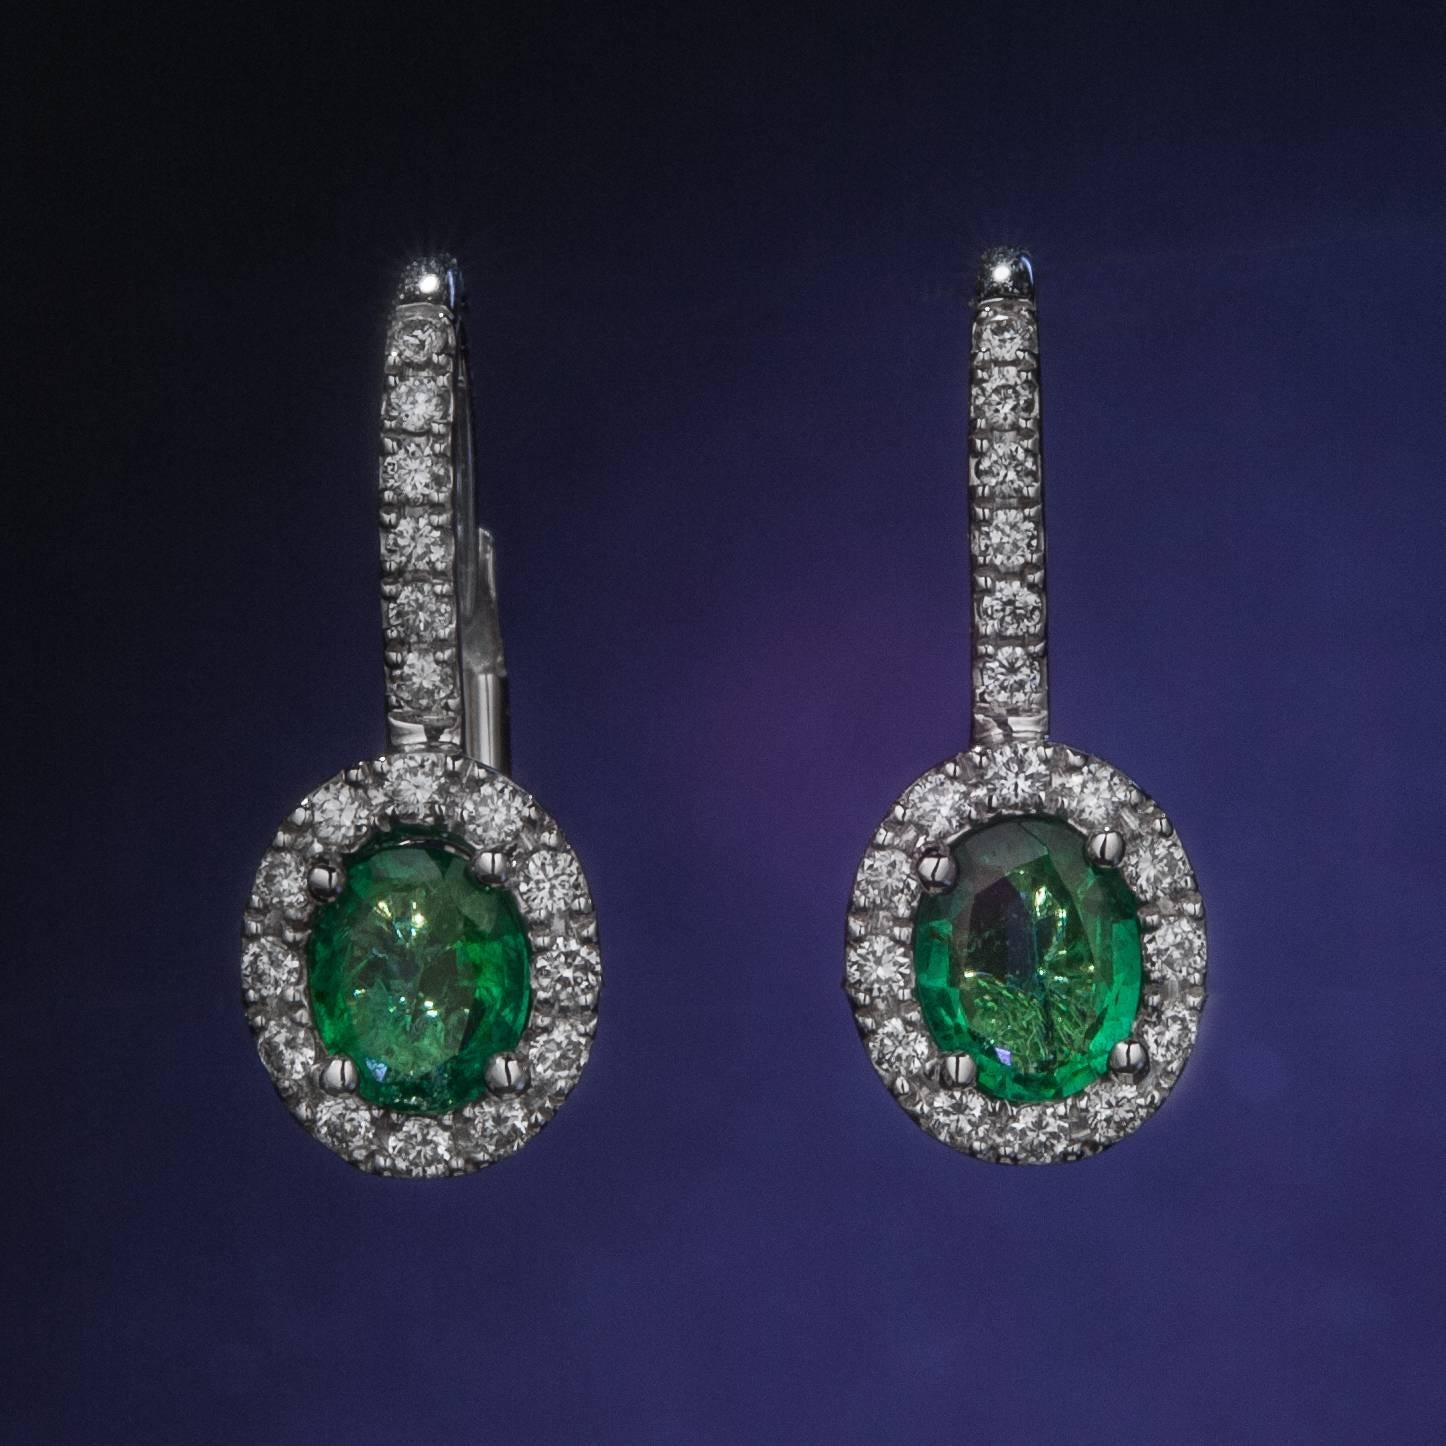 These lovely drop earrings are crafted in 18k white gold and display .50 carats of vibrant emerald gemstones.  The rich green color is accented by .20 carats of brilliant pave diamonds.  This is a classic pair of emerald drop earrings!